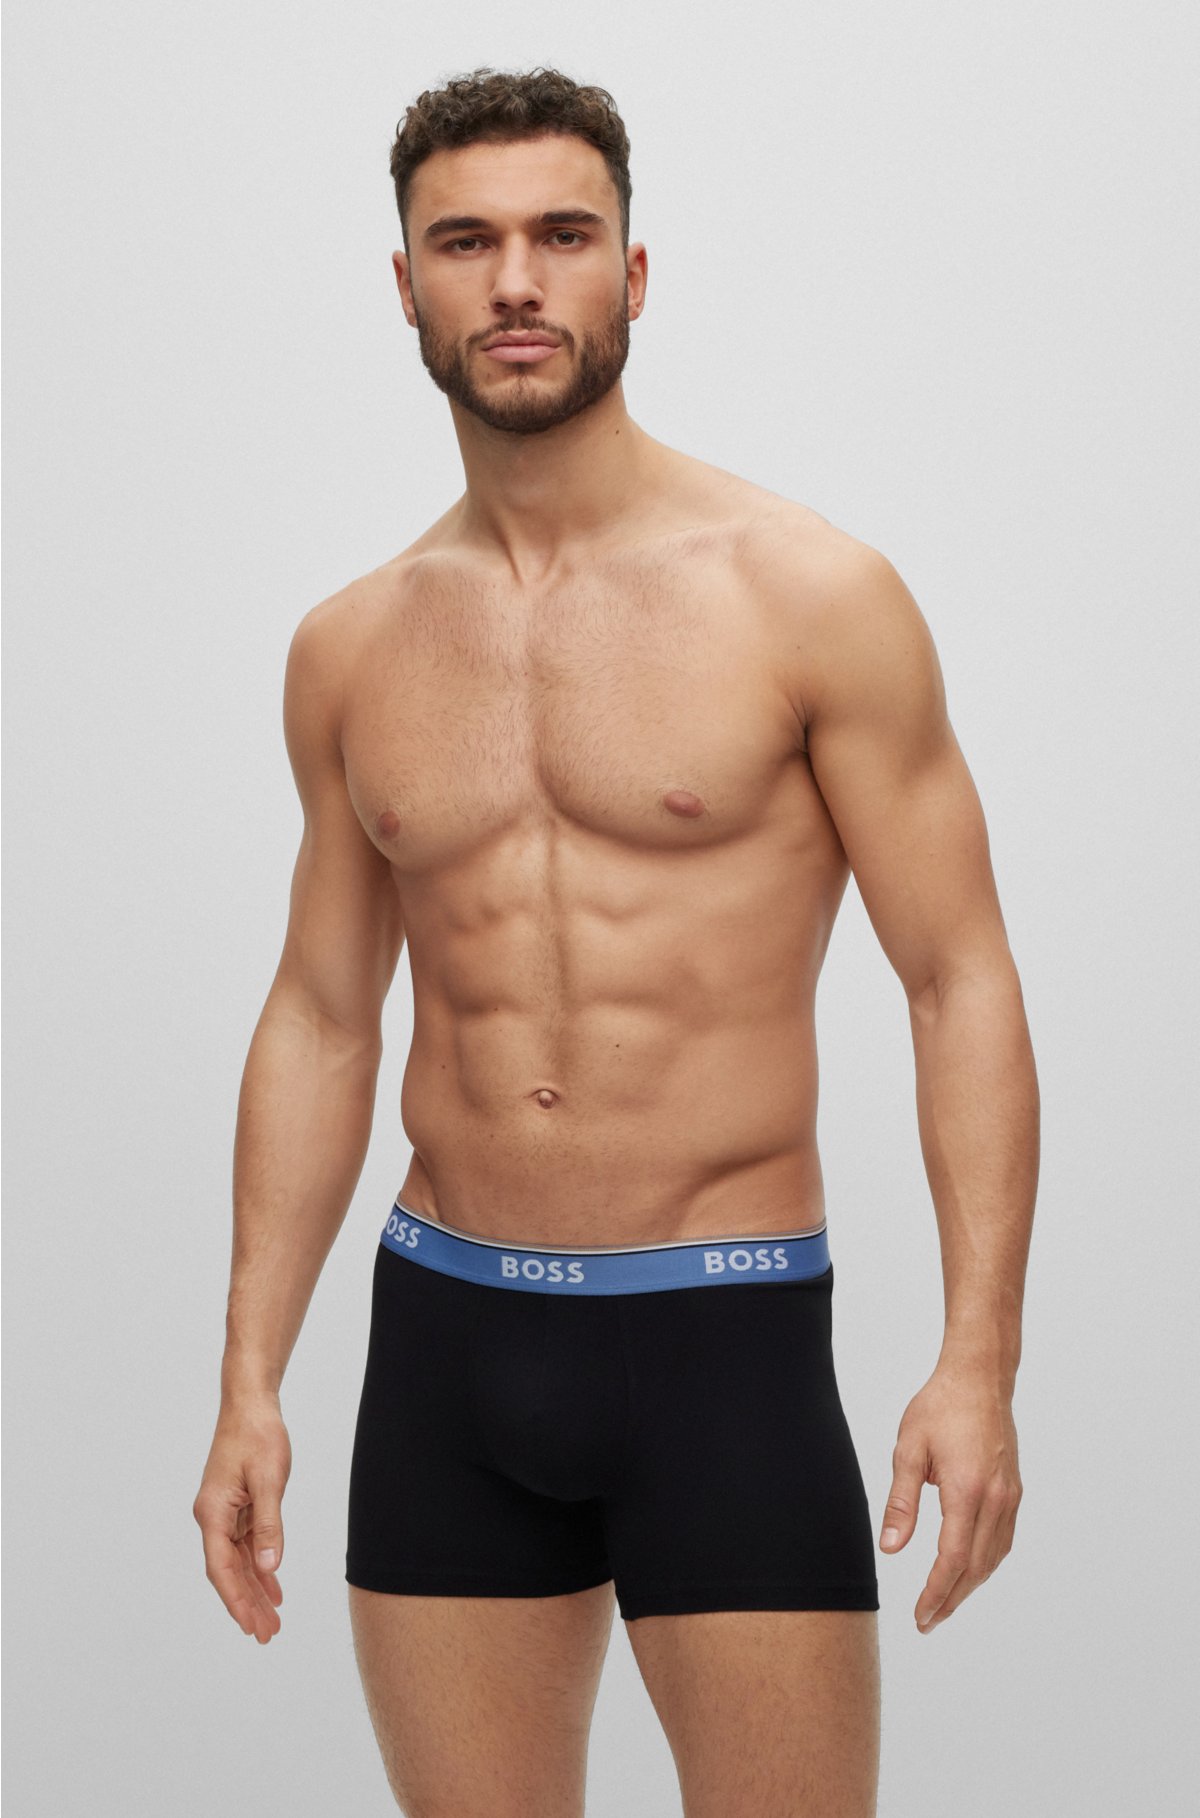 BOSS - Three-pack of waistbands with logo briefs boxer